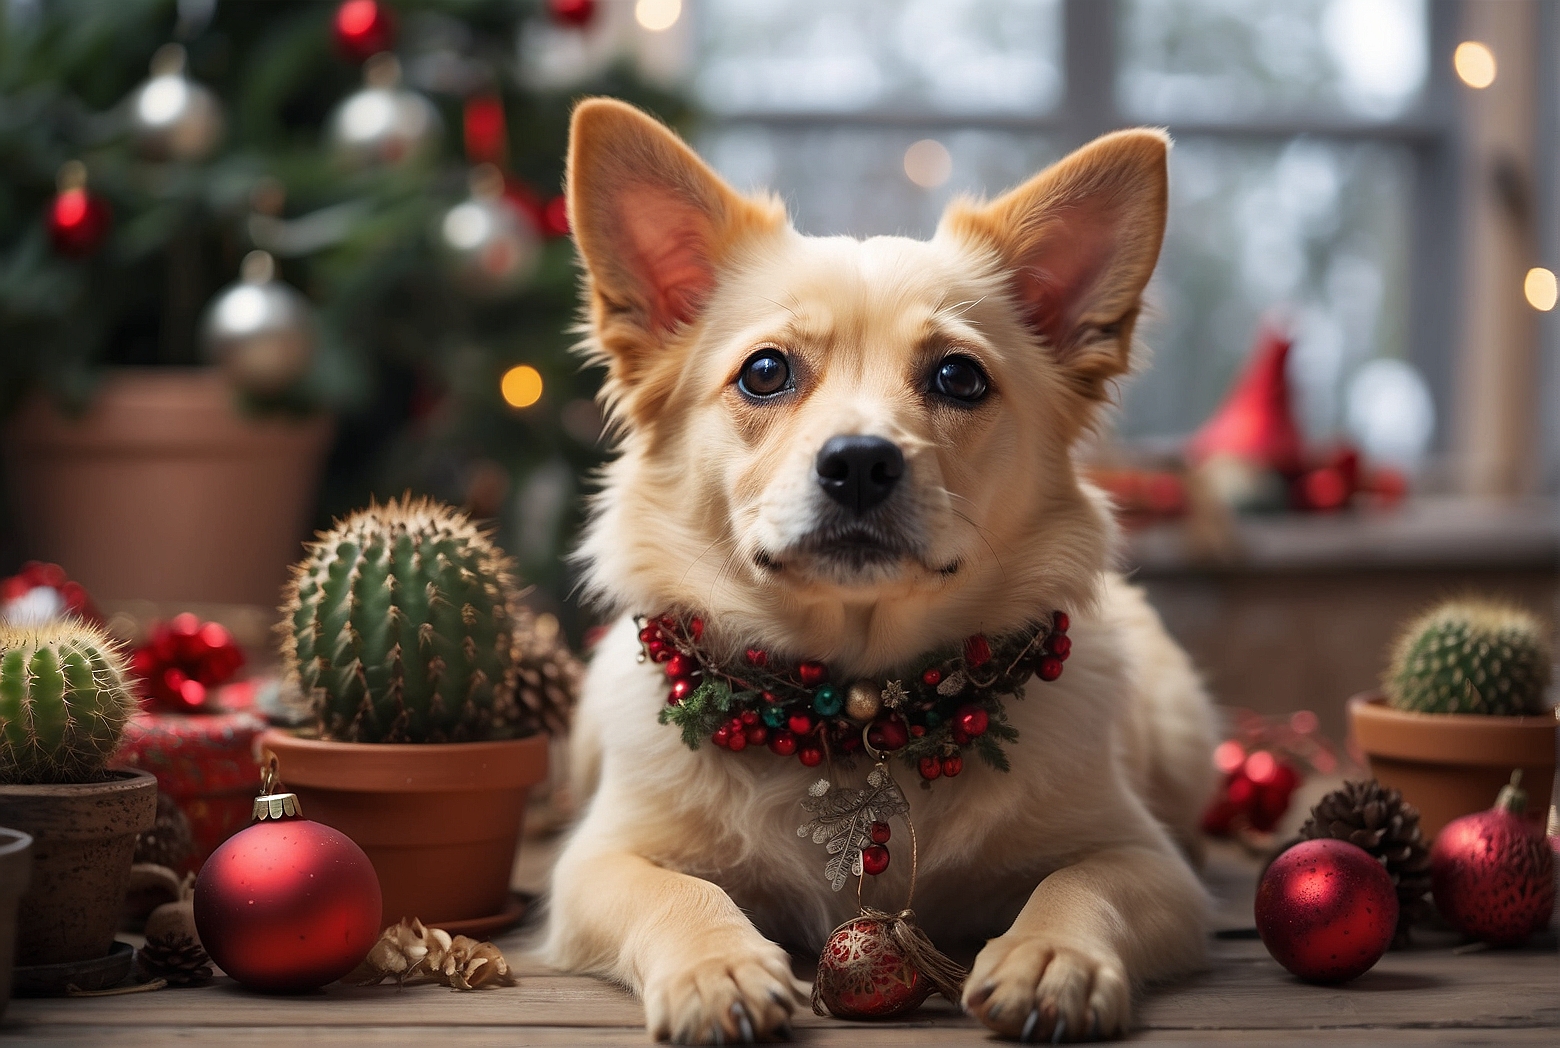 Are Christmas Cacti Poisonous to Dogs?